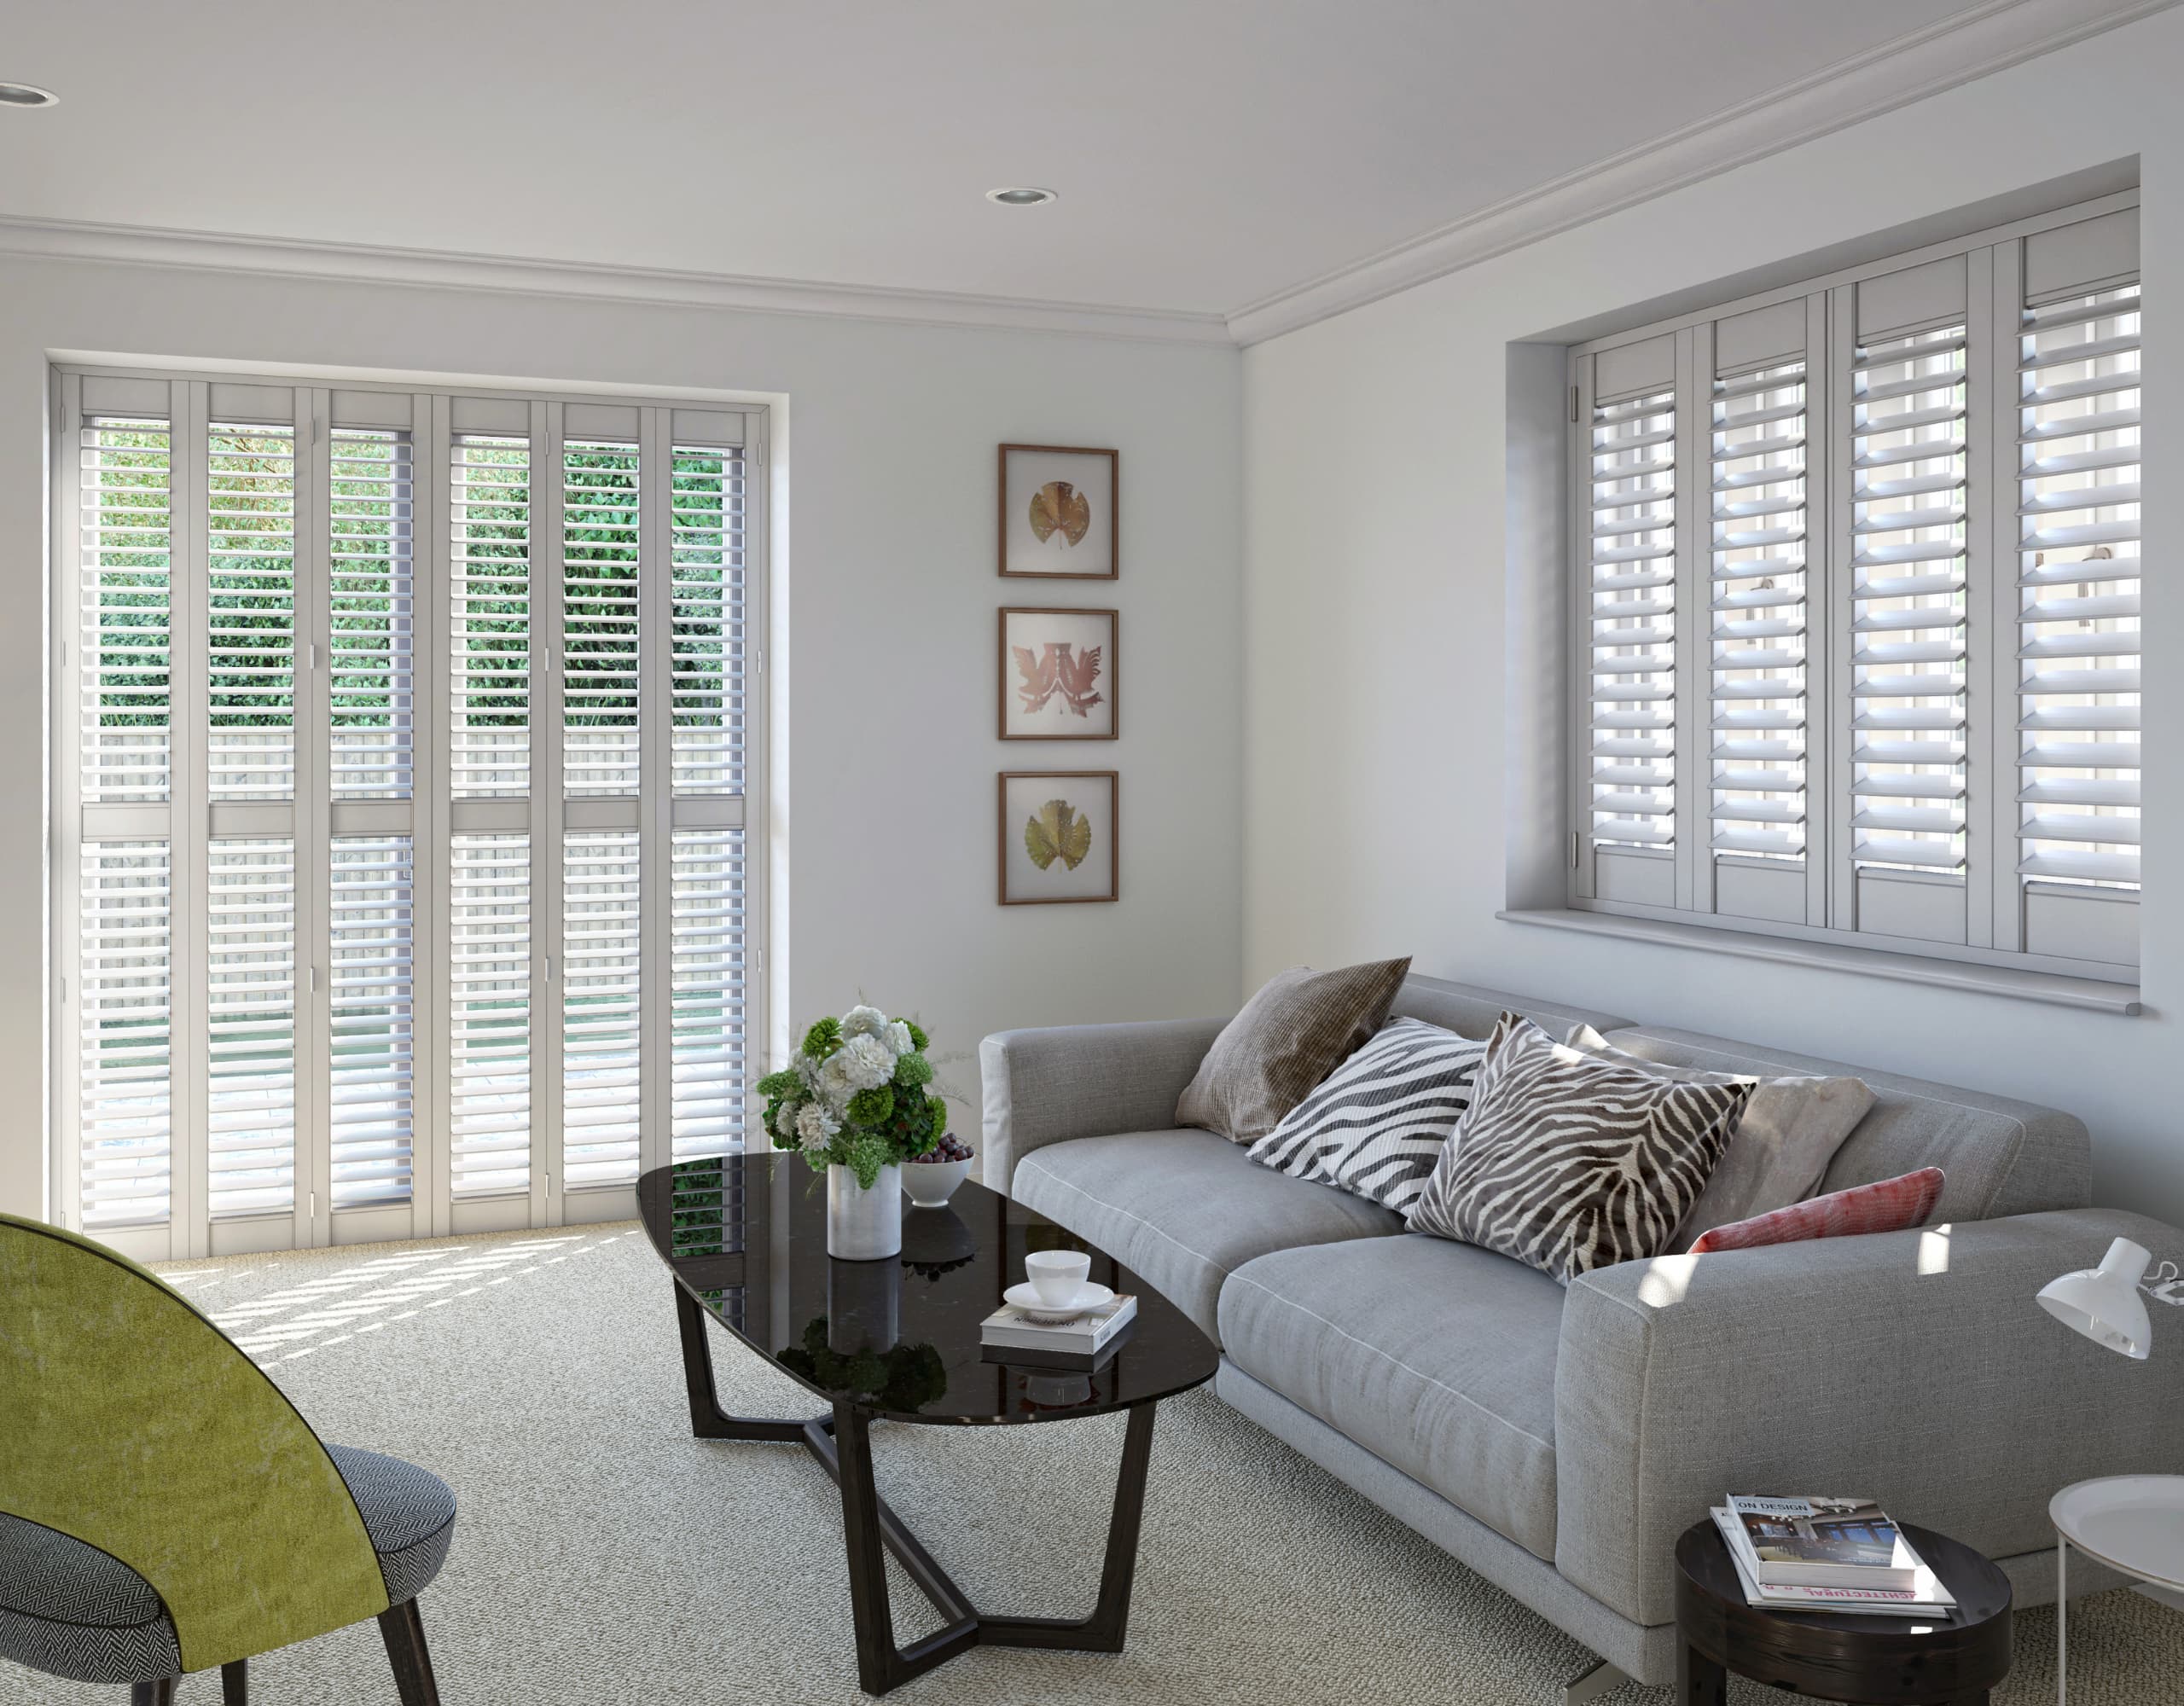 PolyWood Shutters prices